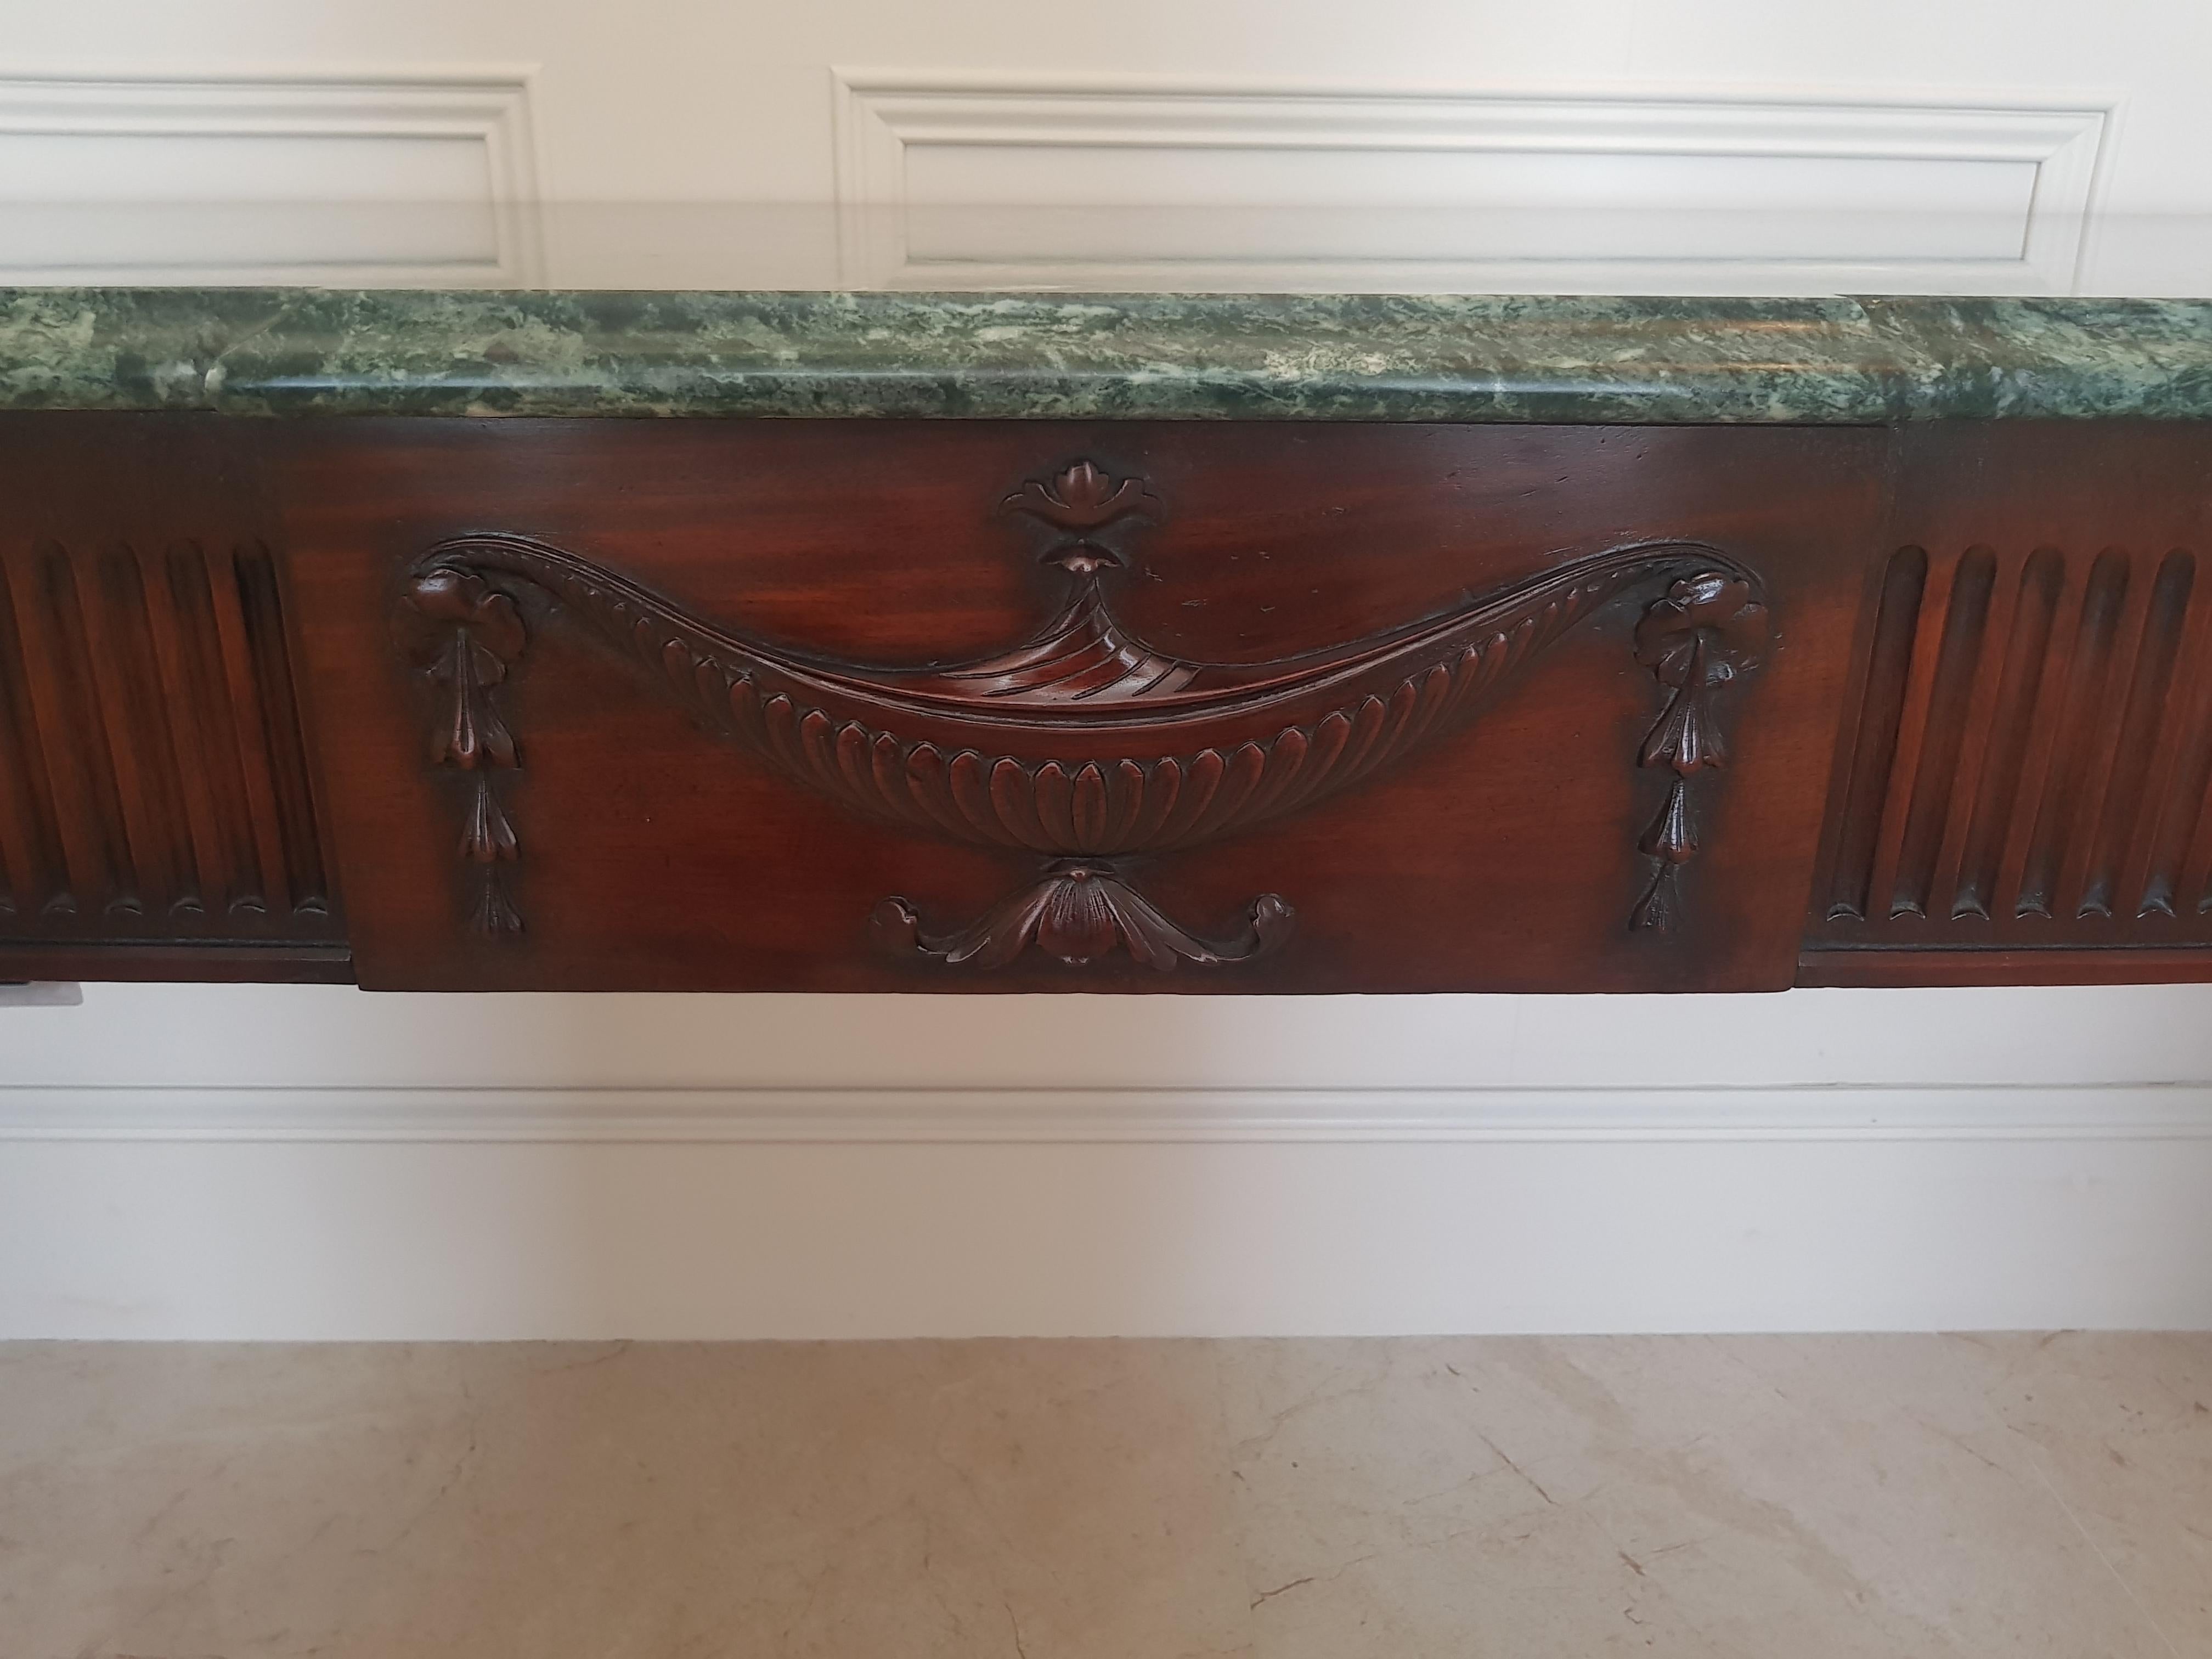 Irish 18th Century Mahogany Serving Table- Provenance  - Druids Glen Co. Wicklow In Good Condition For Sale In Dromod, Co. Leitrim